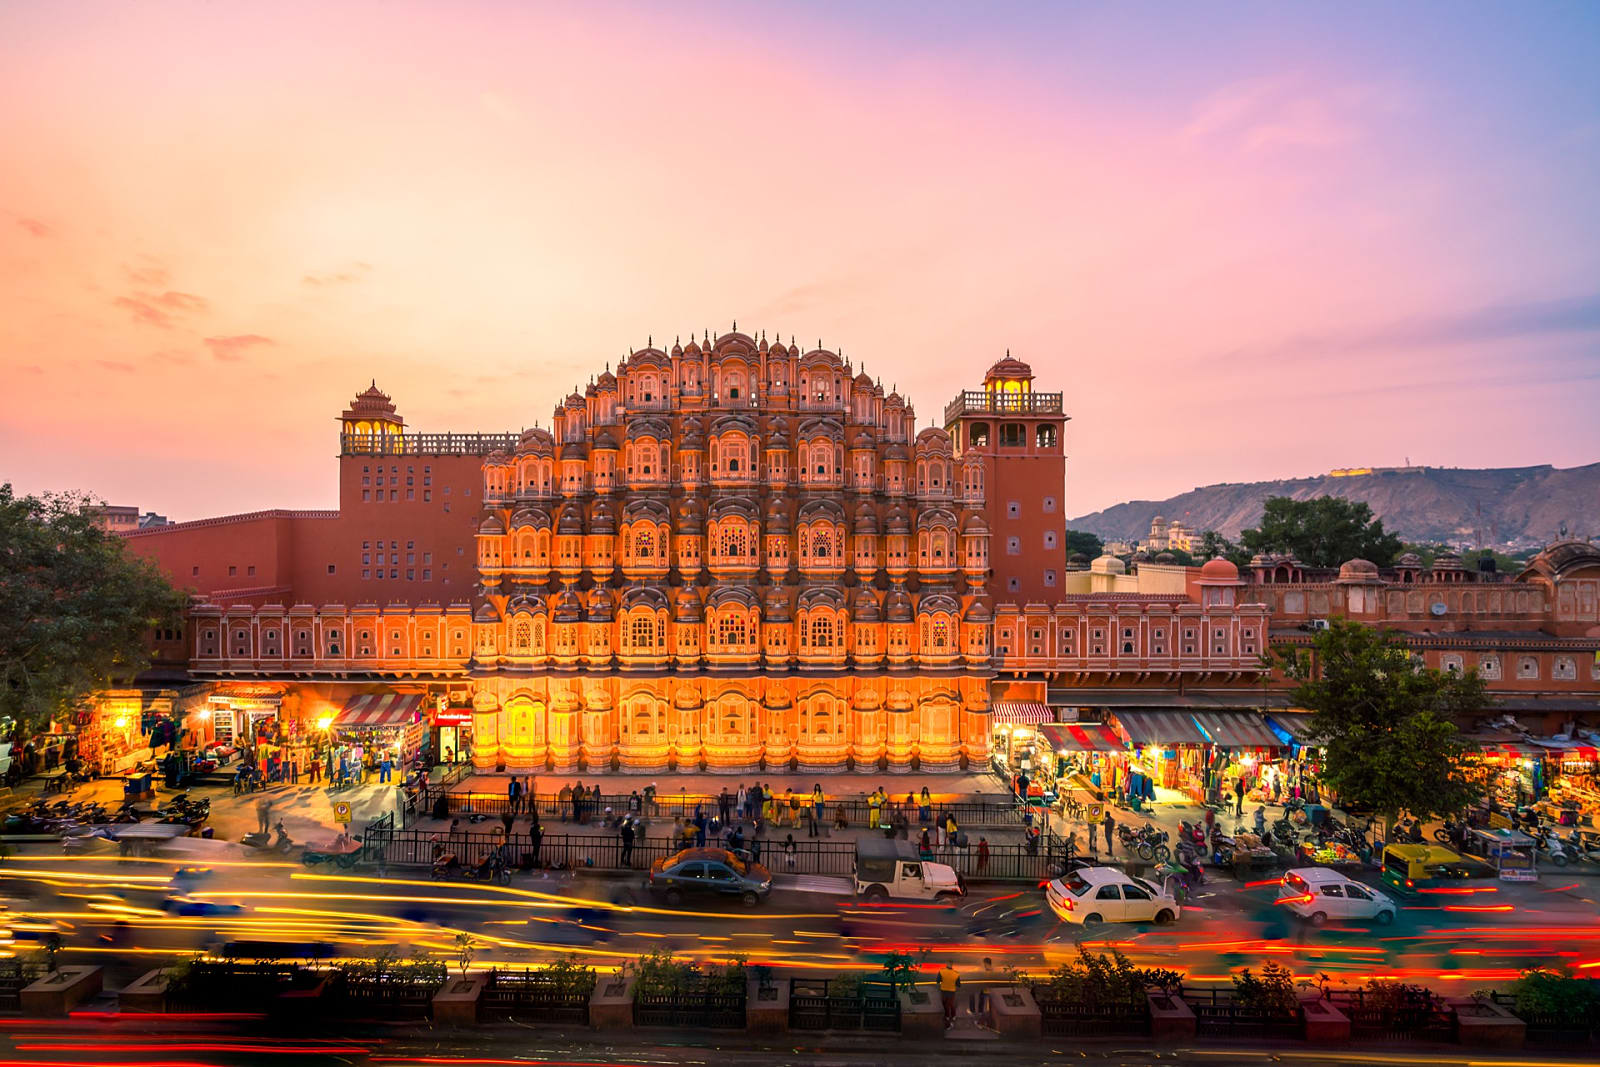 Jaipur, the pink city, is now a World Heritage site